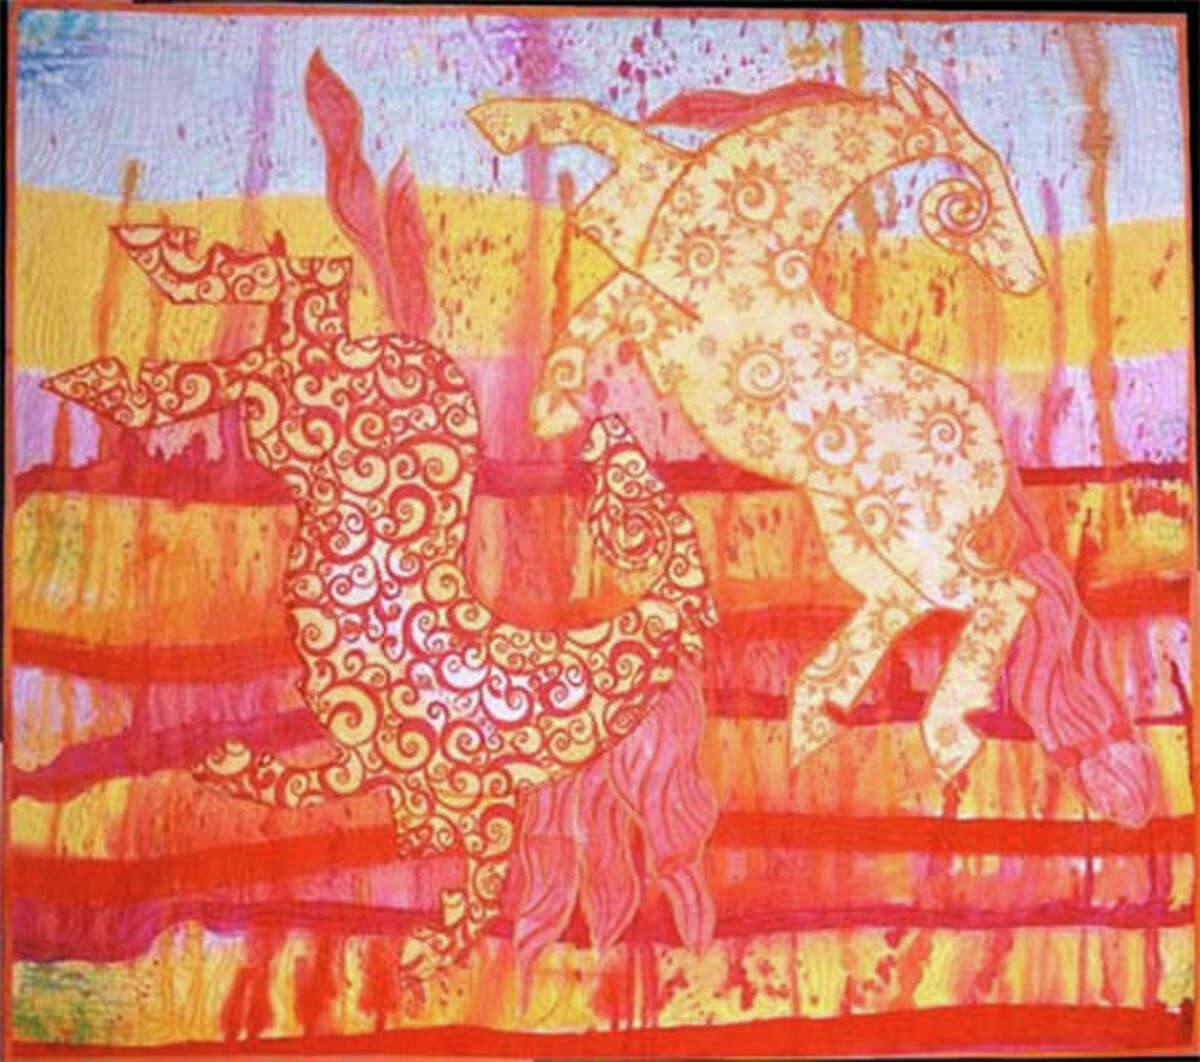 Kim Ritter's love of ponies and horses inspired "Sun Ponies."